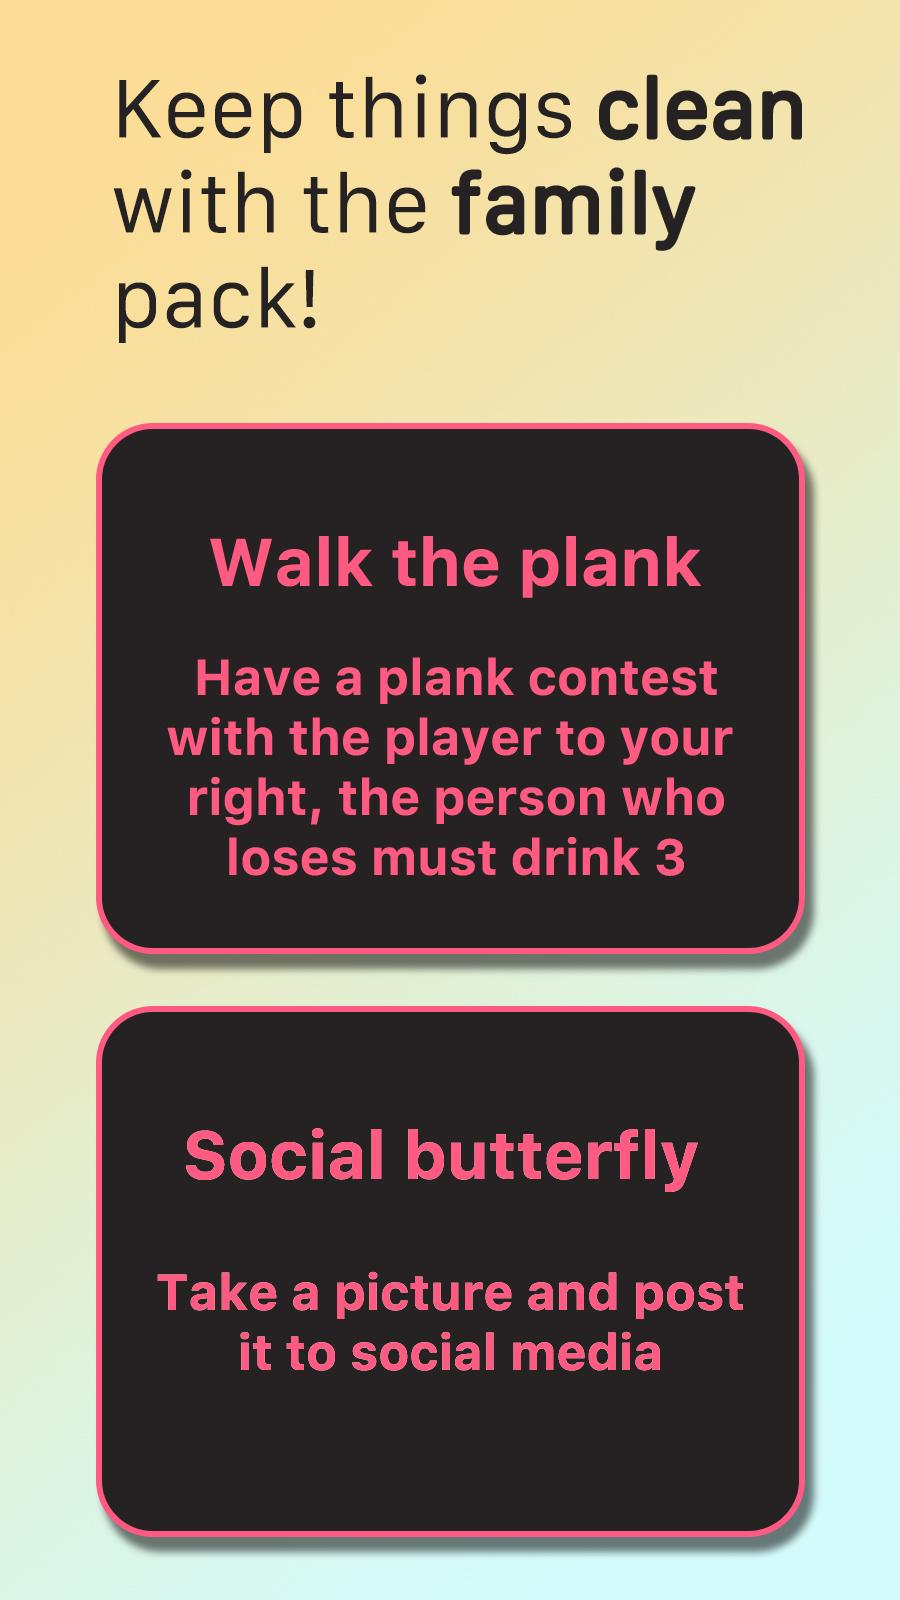 Game Night - The Party Card Game 1.1.45 Screenshot 11